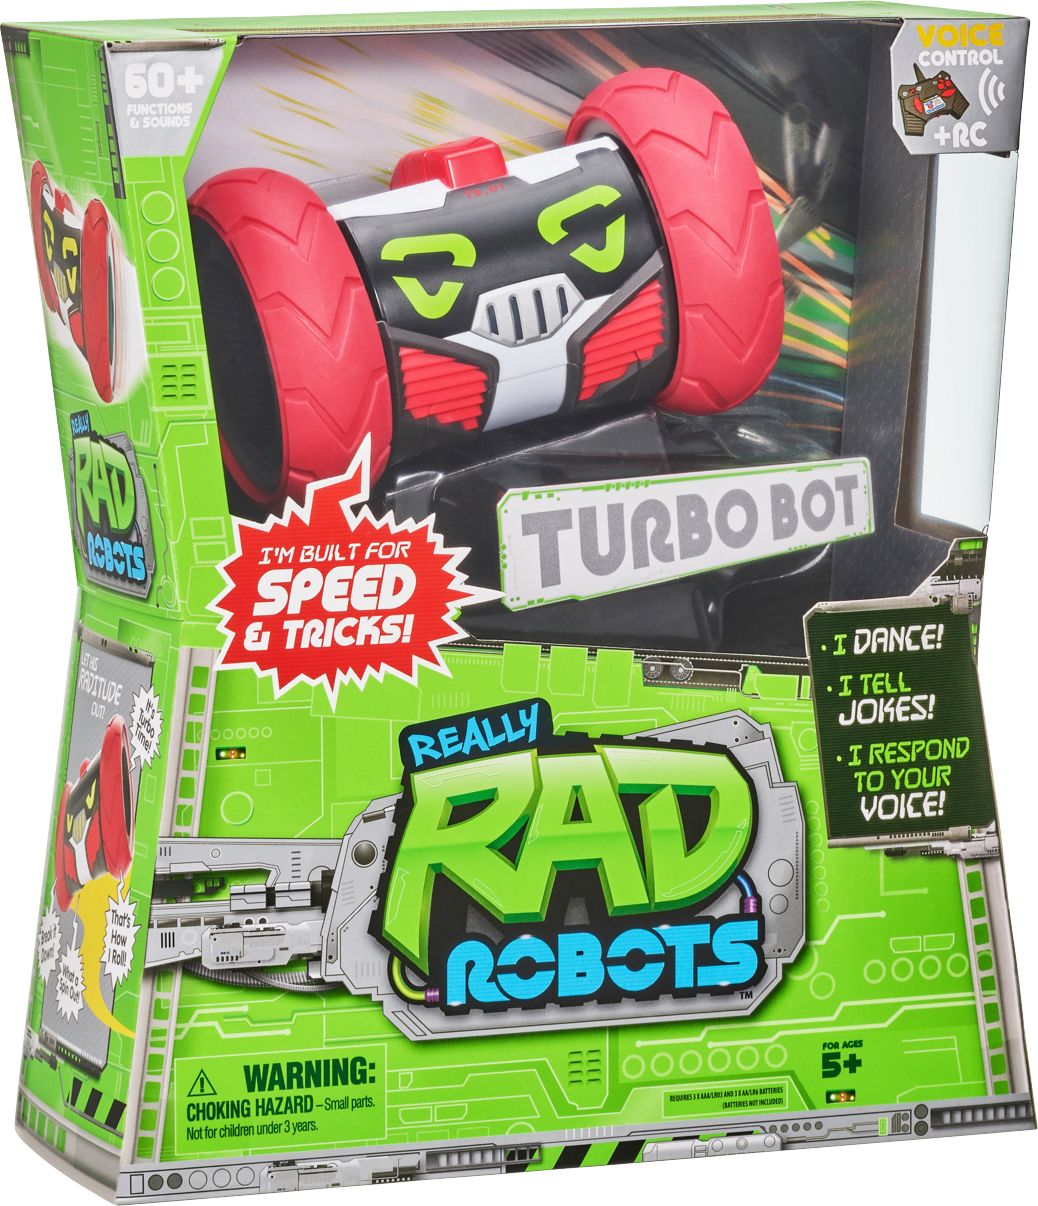 Really Rad Robots 27850 Turbo Bot Toy for sale online 